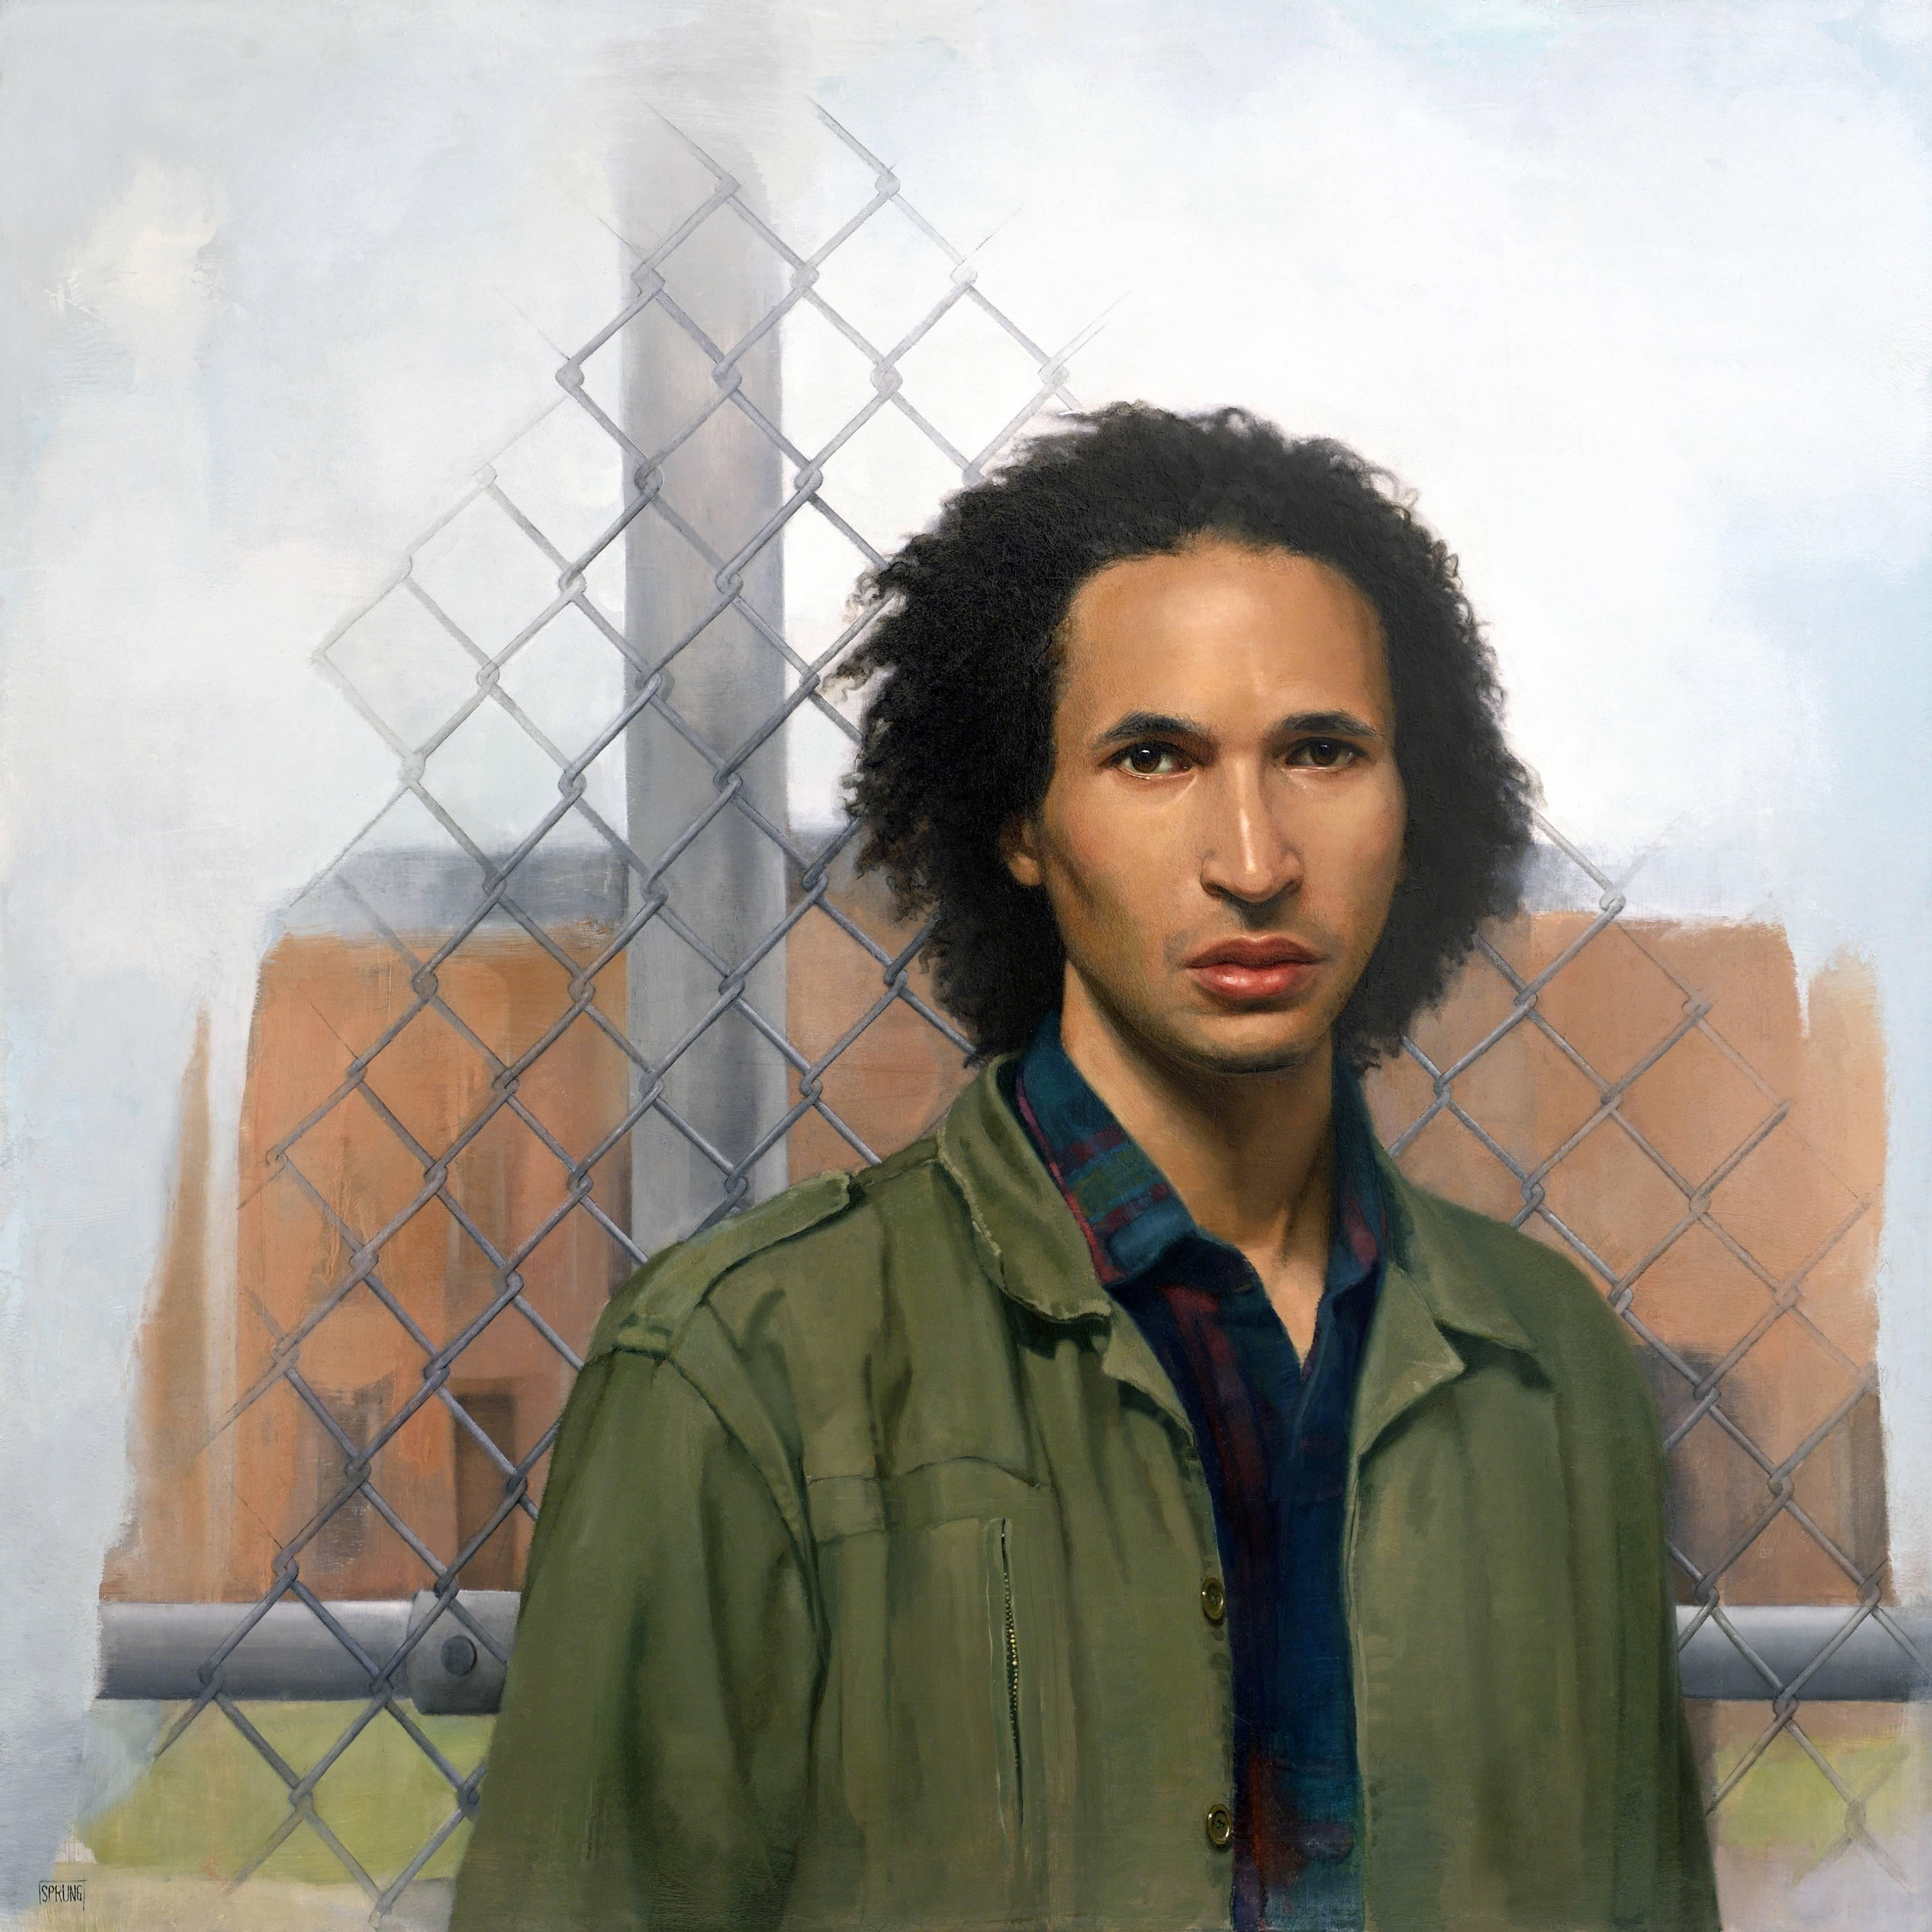 Sharon Sprung Figurative Painting - THE REFUGEE, portrait, man on the street, green jacket, chain link fence